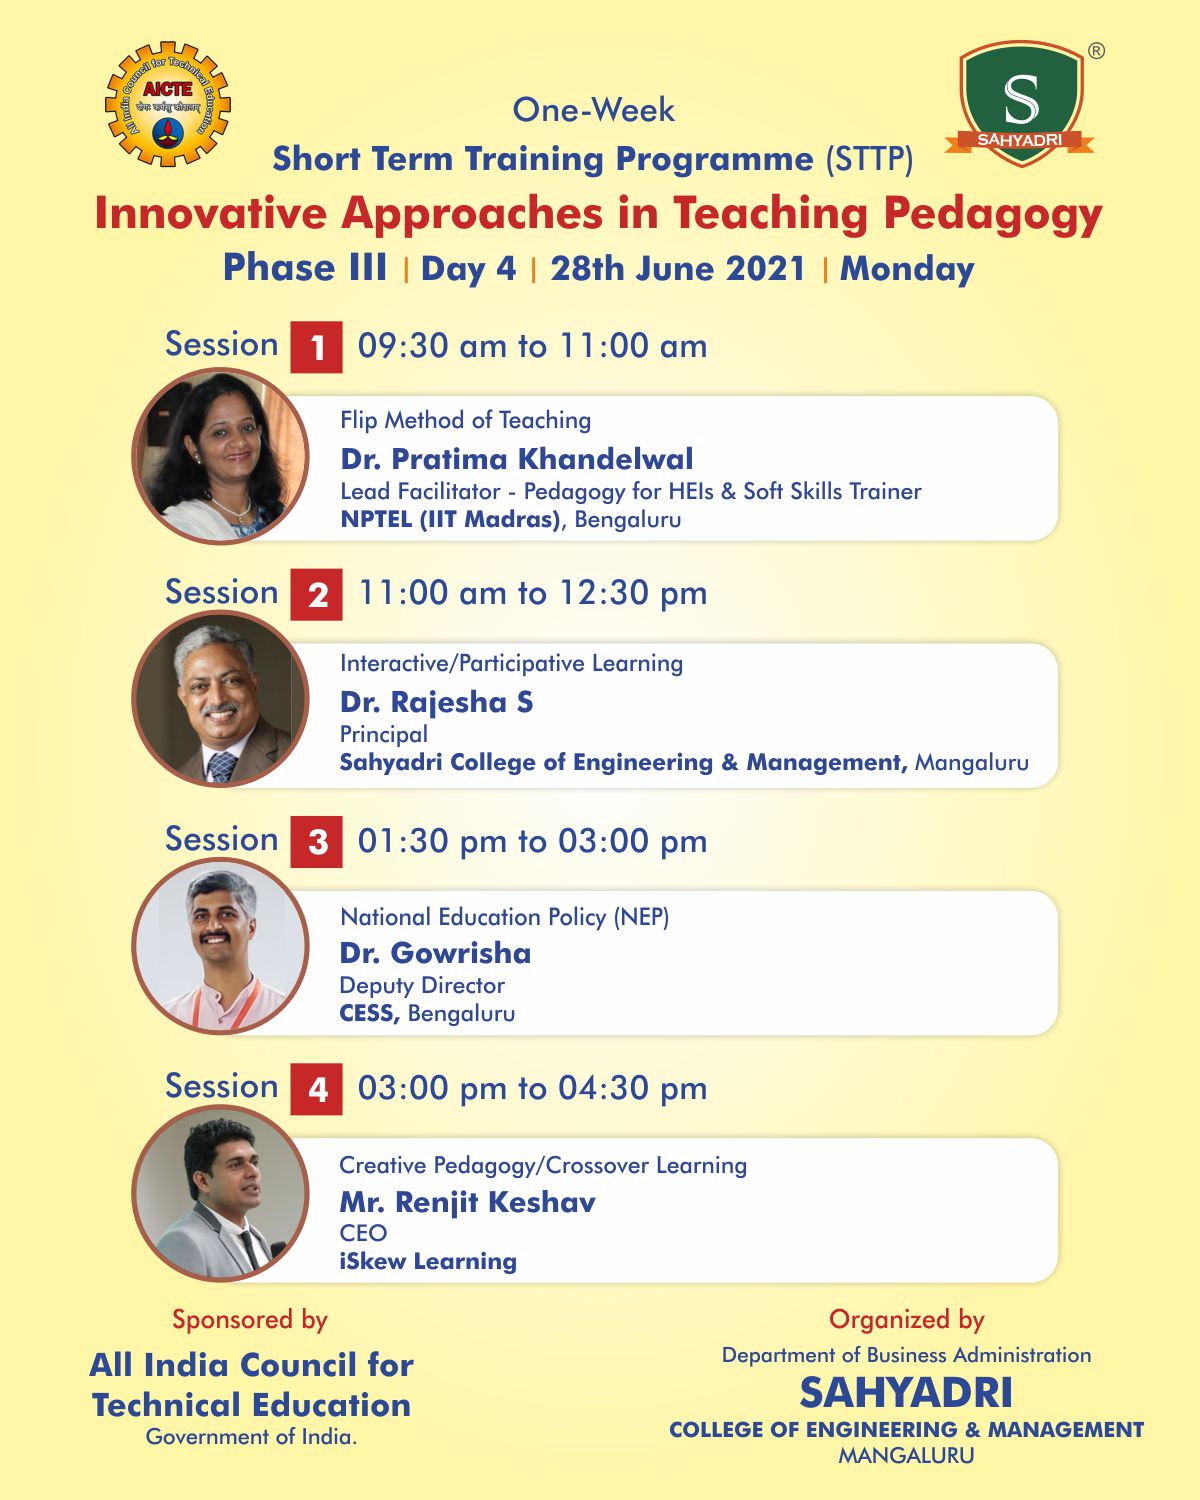 Phase III: AICTE Sponsored One-Week STTP on “Innovative Approaches in Teaching Pedagogy”